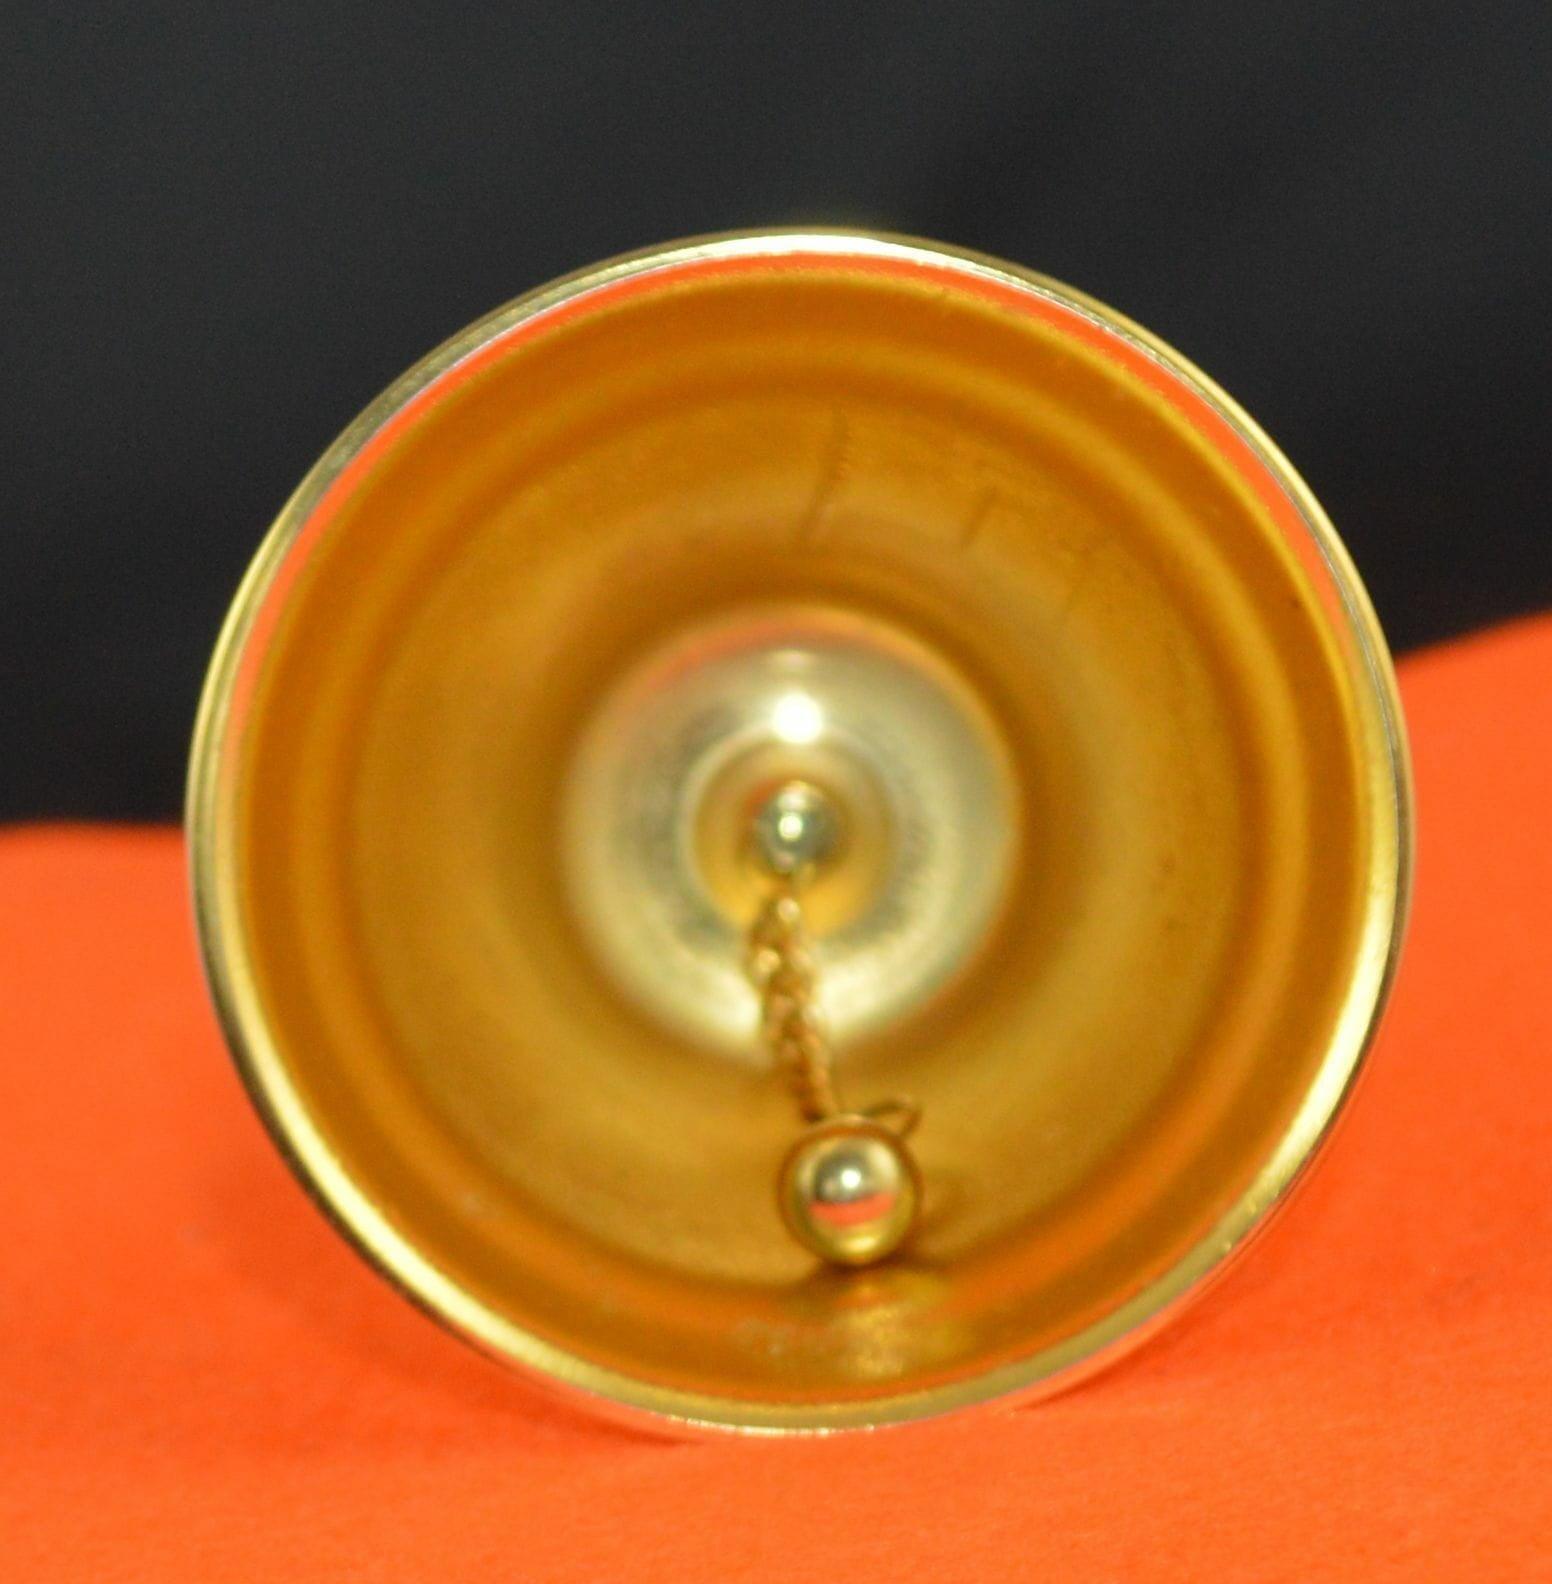 GOLD COLOURED METAL BELL WITH CUT GLASS BEAD ON HANDLE - TMD167207